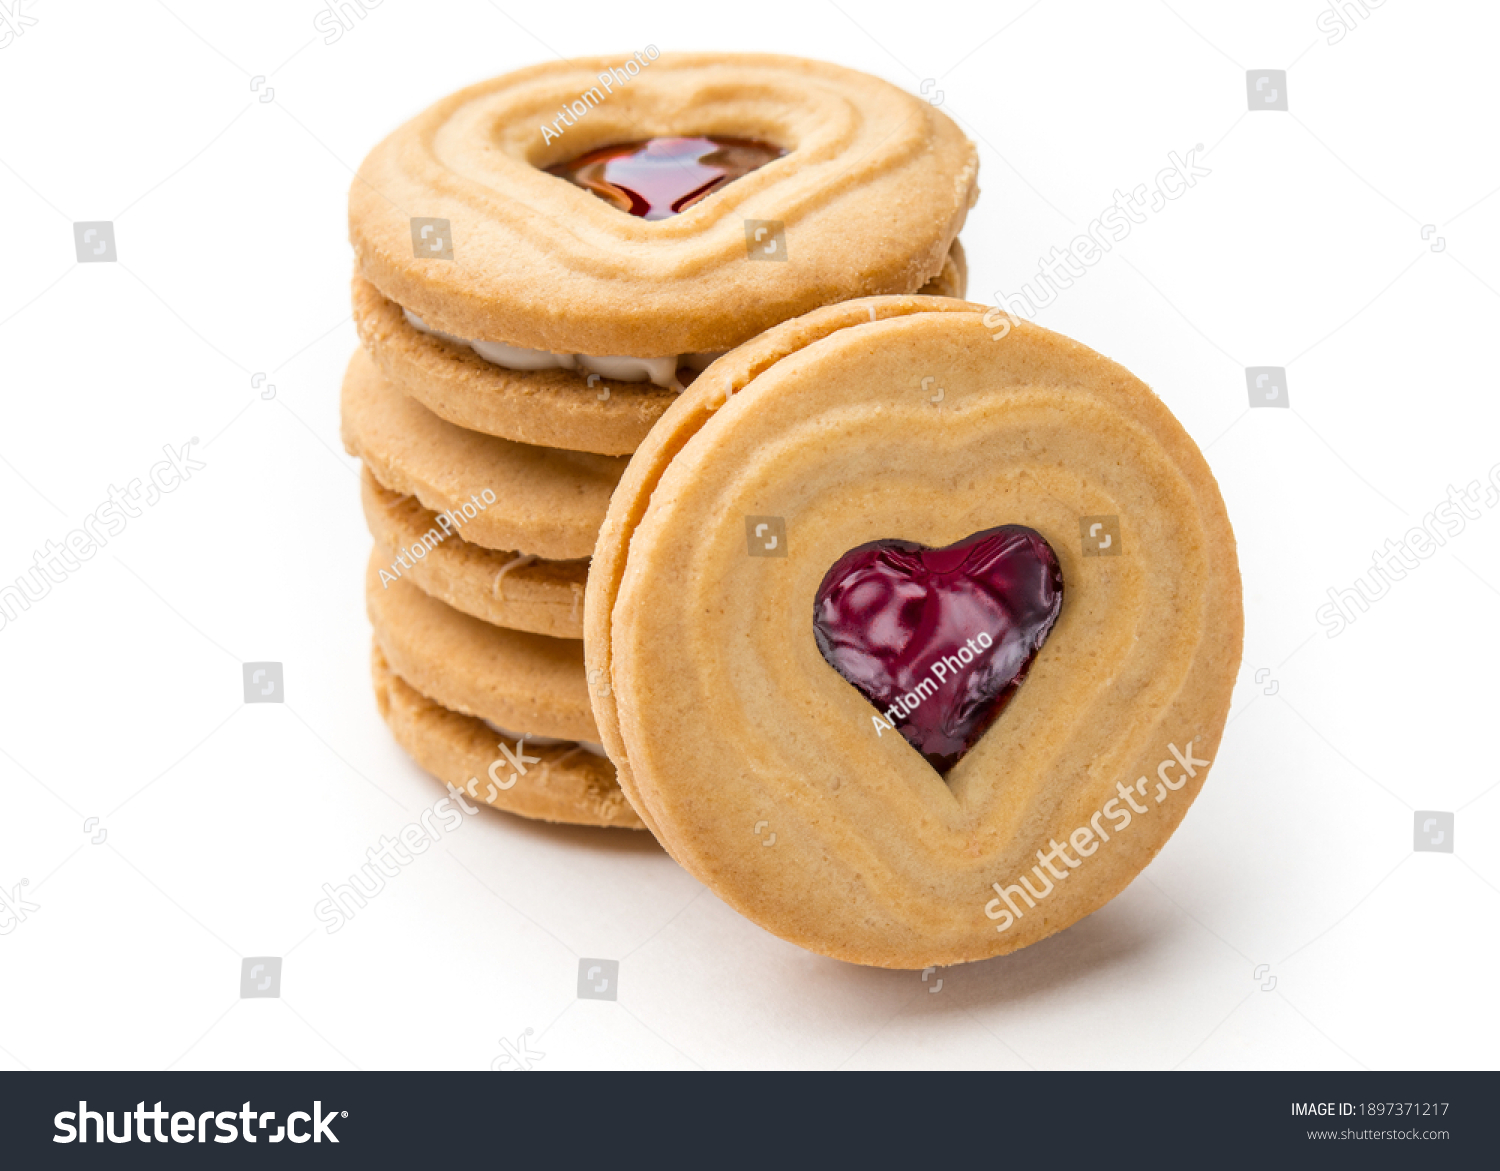 Cookies. Cookie Hearts shape Red jam or strawberry jelly inside biscuit cookie. Homemade baking. Sweet bakery. Top view on white background. #1897371217